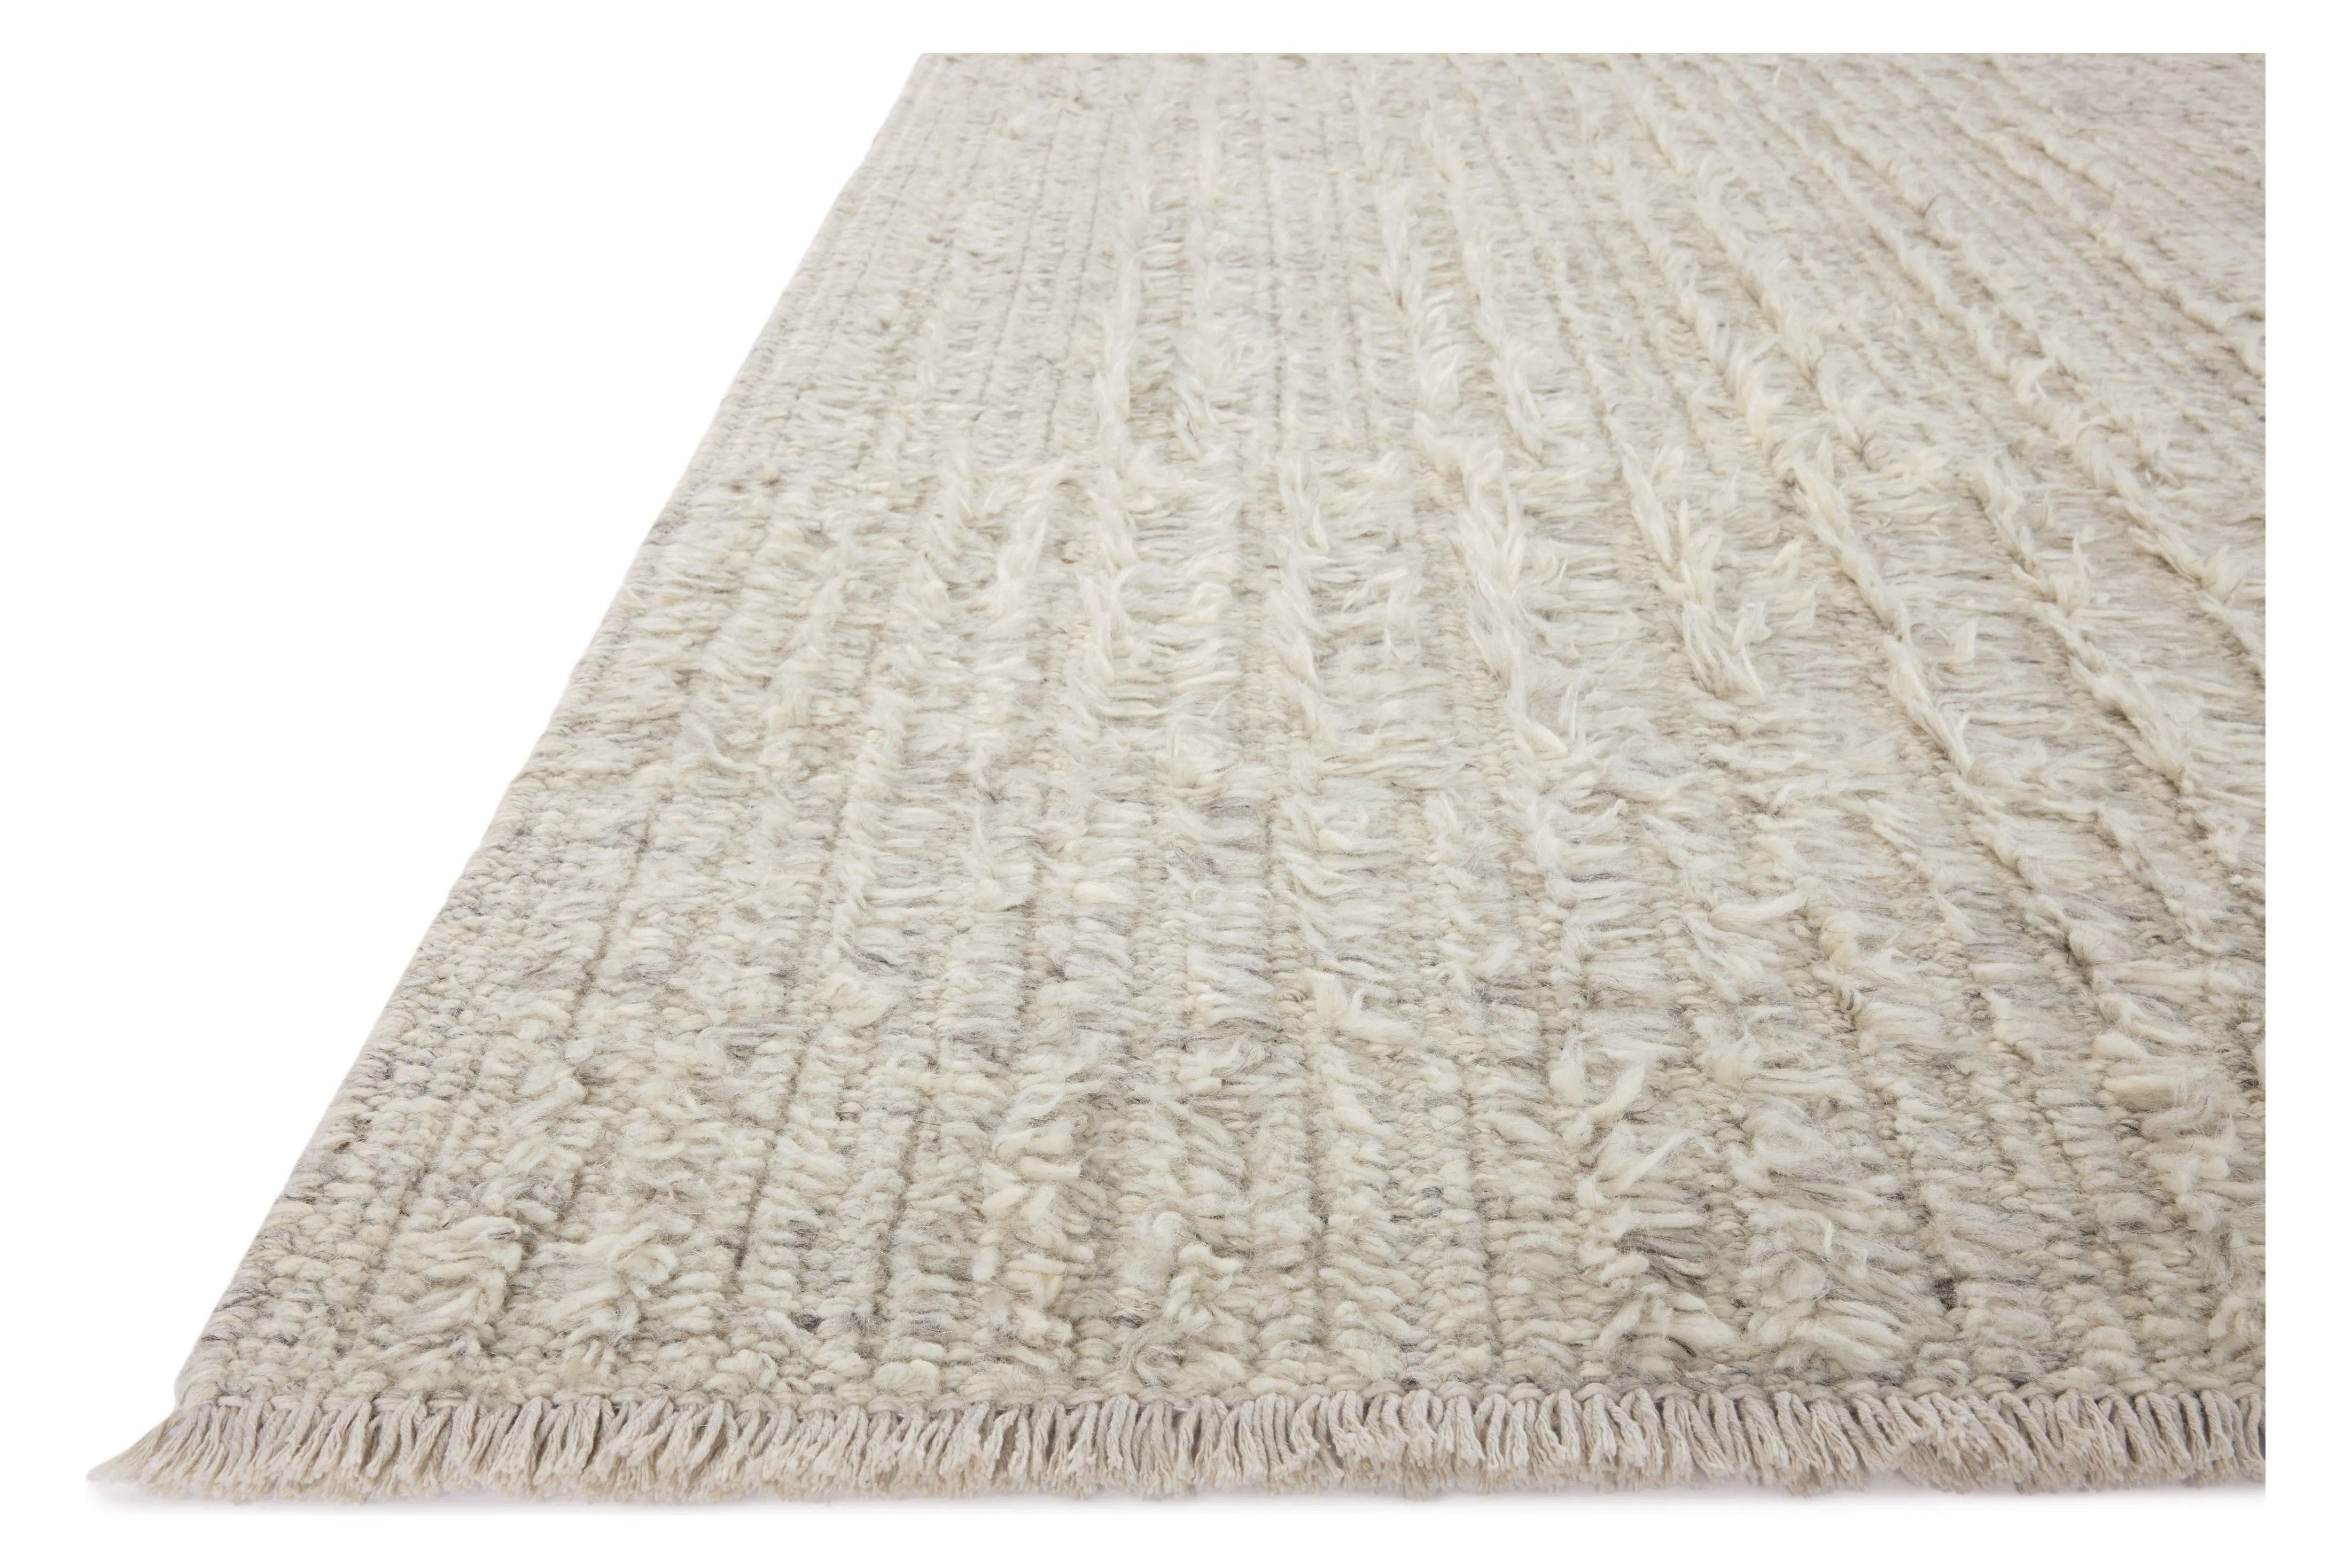 Irresistible to walk upon, the Dana Birch Rug by Brigette Romanek x Loloi has a high-low texture that alternates between a subtly shaggy pile and a soft base. Horizontal broken stripes give the area rug a fresh and energized structure, while a finish of fringe along the edges accentuates its sense of movement. Amethyst Home provides interior design, new home construction design consulting, vintage area rugs, and lighting in the San Diego metro area.